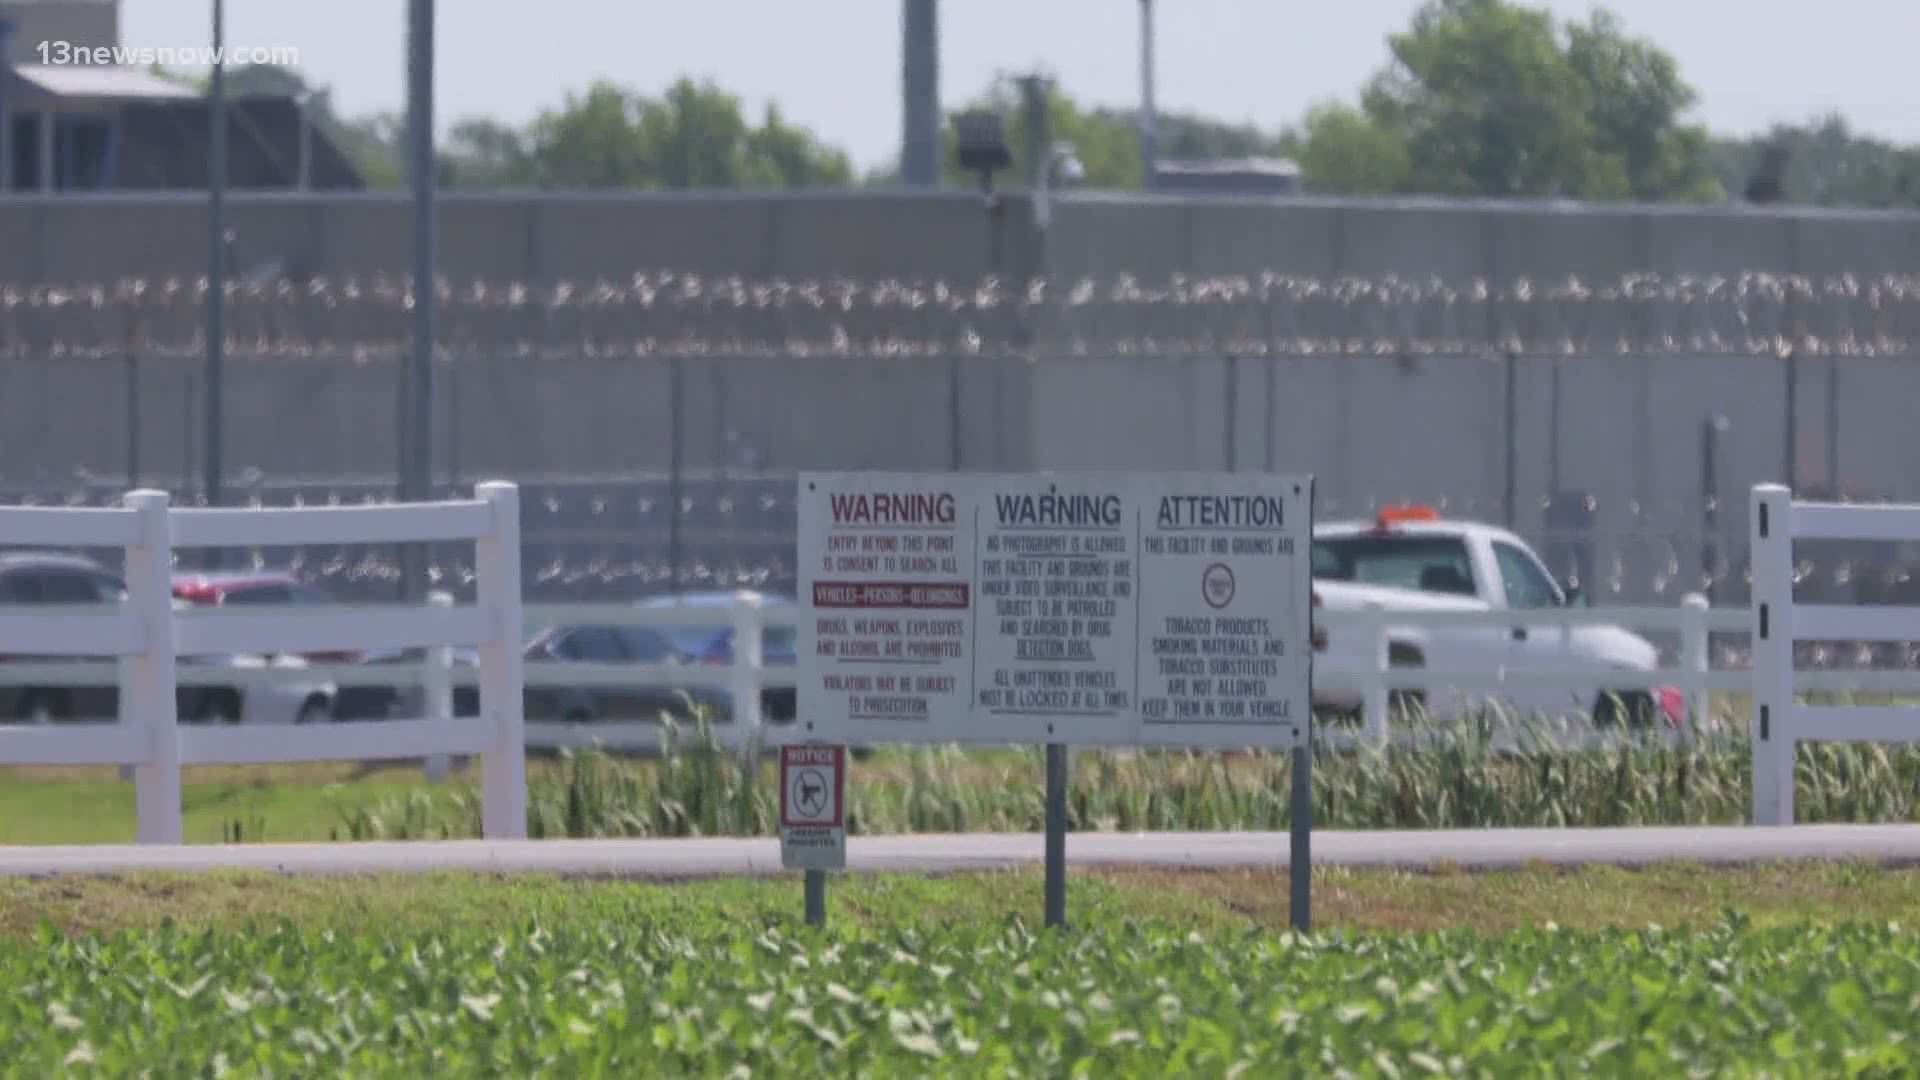 St. Brides Correctional Center inmates and their family members say with an outbreak this widespread, it's "impossible" to stay distant or contain the virus spread.